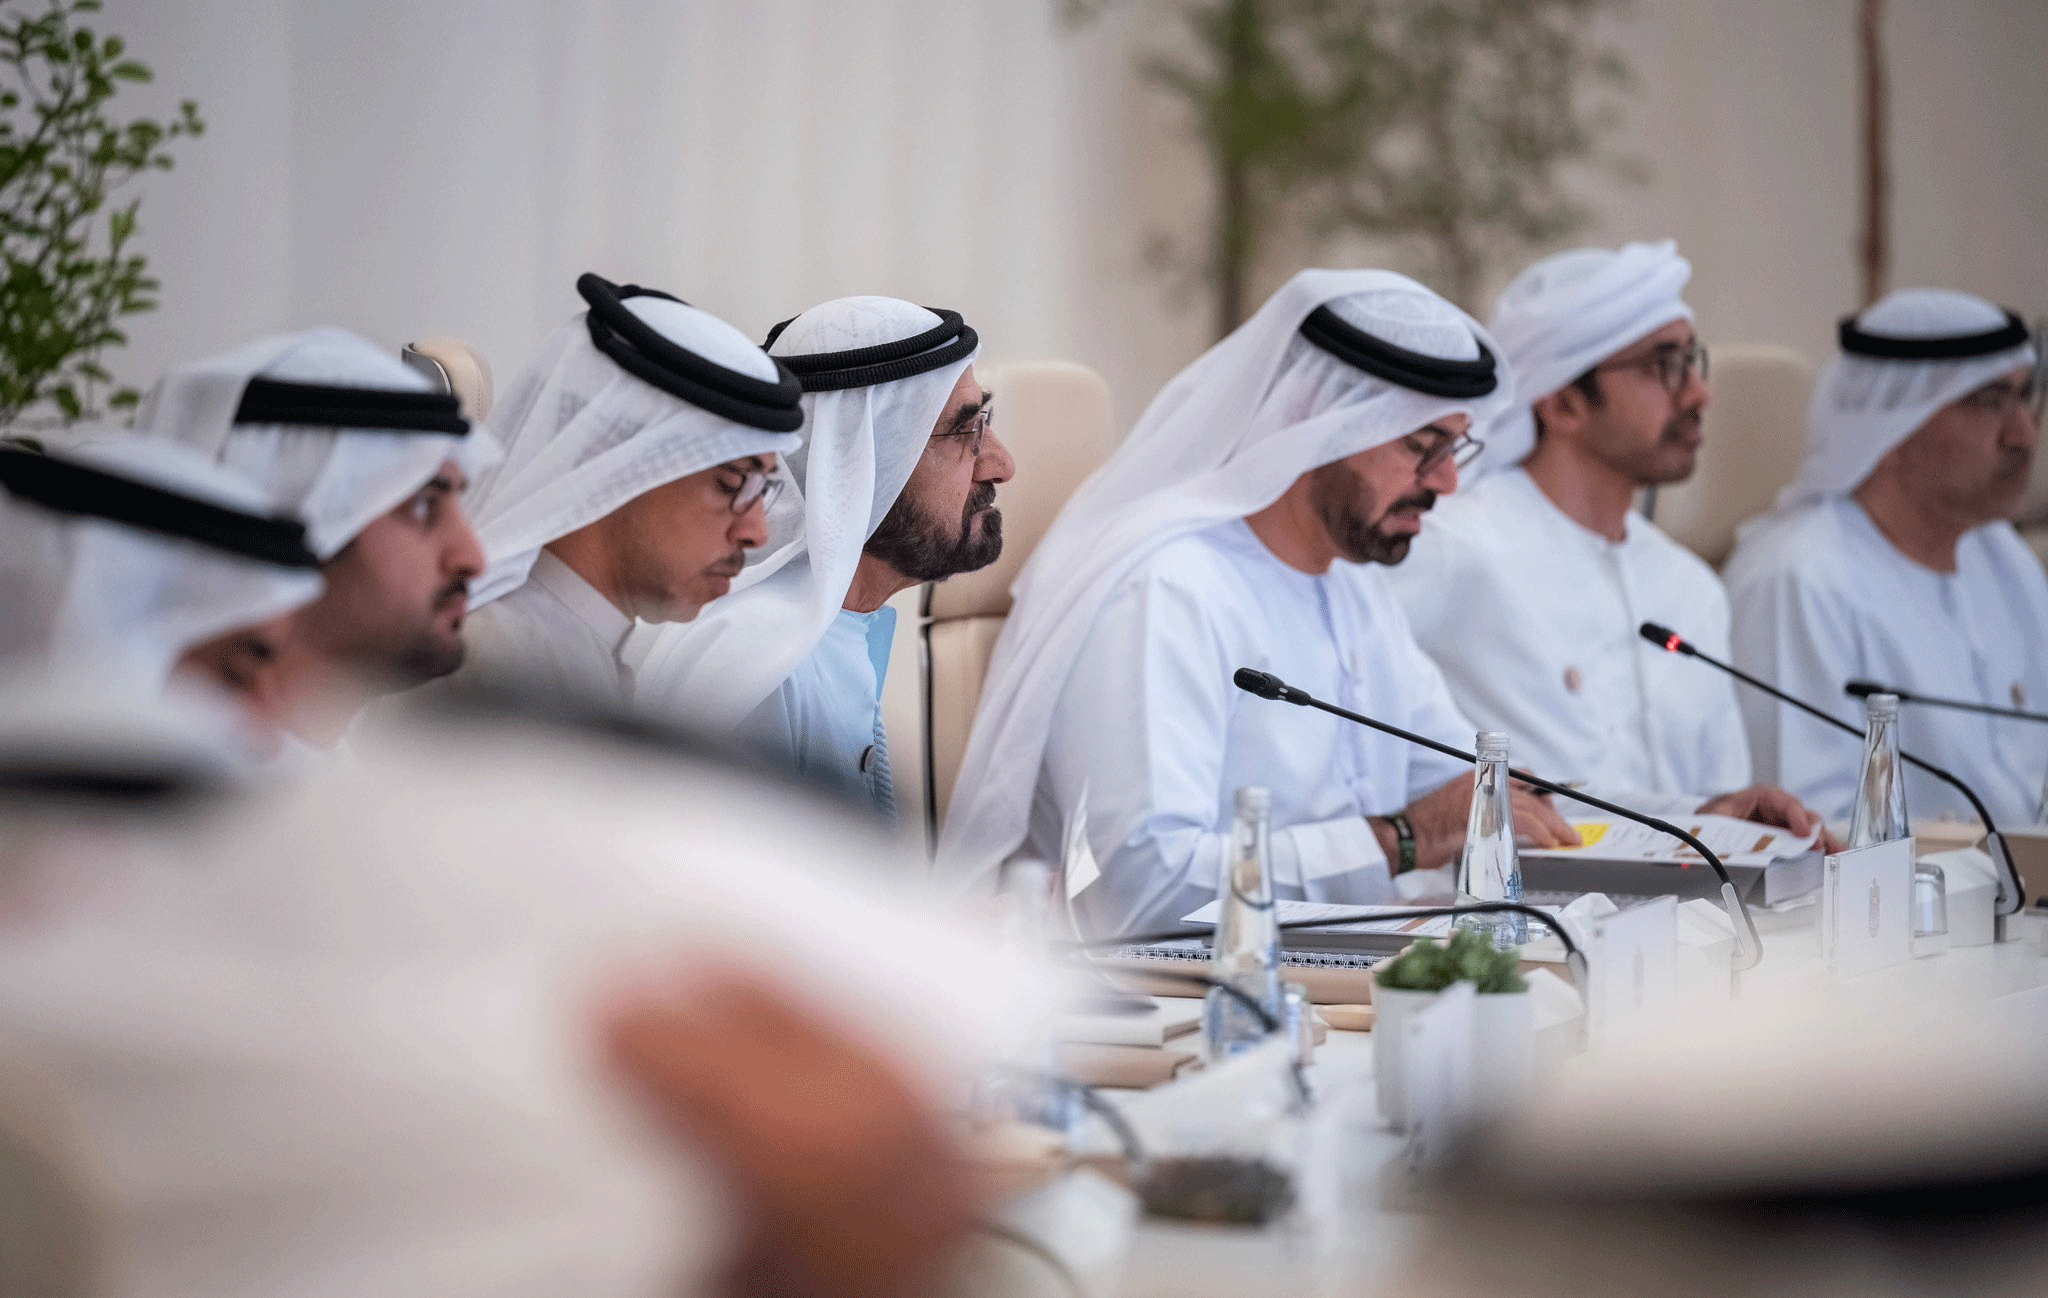 Mohammed bin Rashid Chairs the Cabinet meeting at Expo City